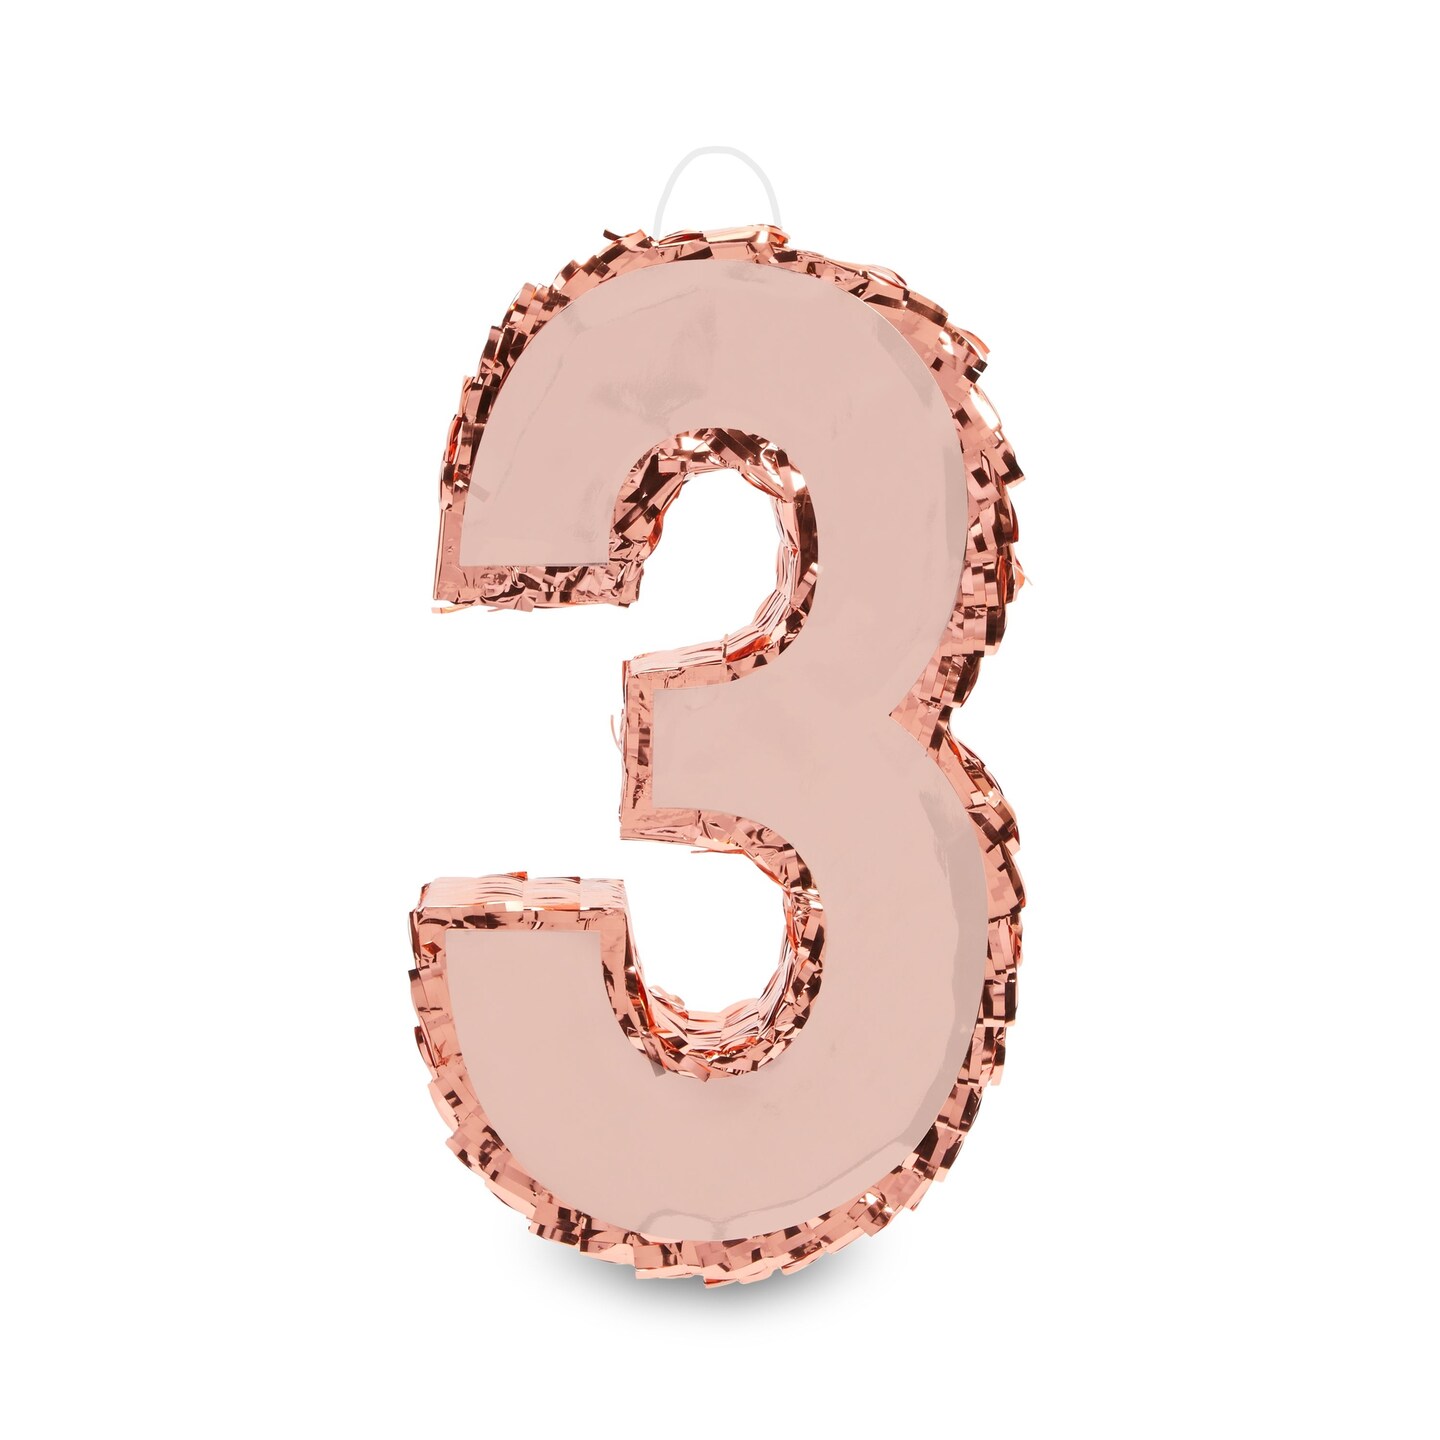 Small Rose Gold Number 3 Pinata for Kids 3rd Birthday Party Decorations, 15.7 x 9 in.